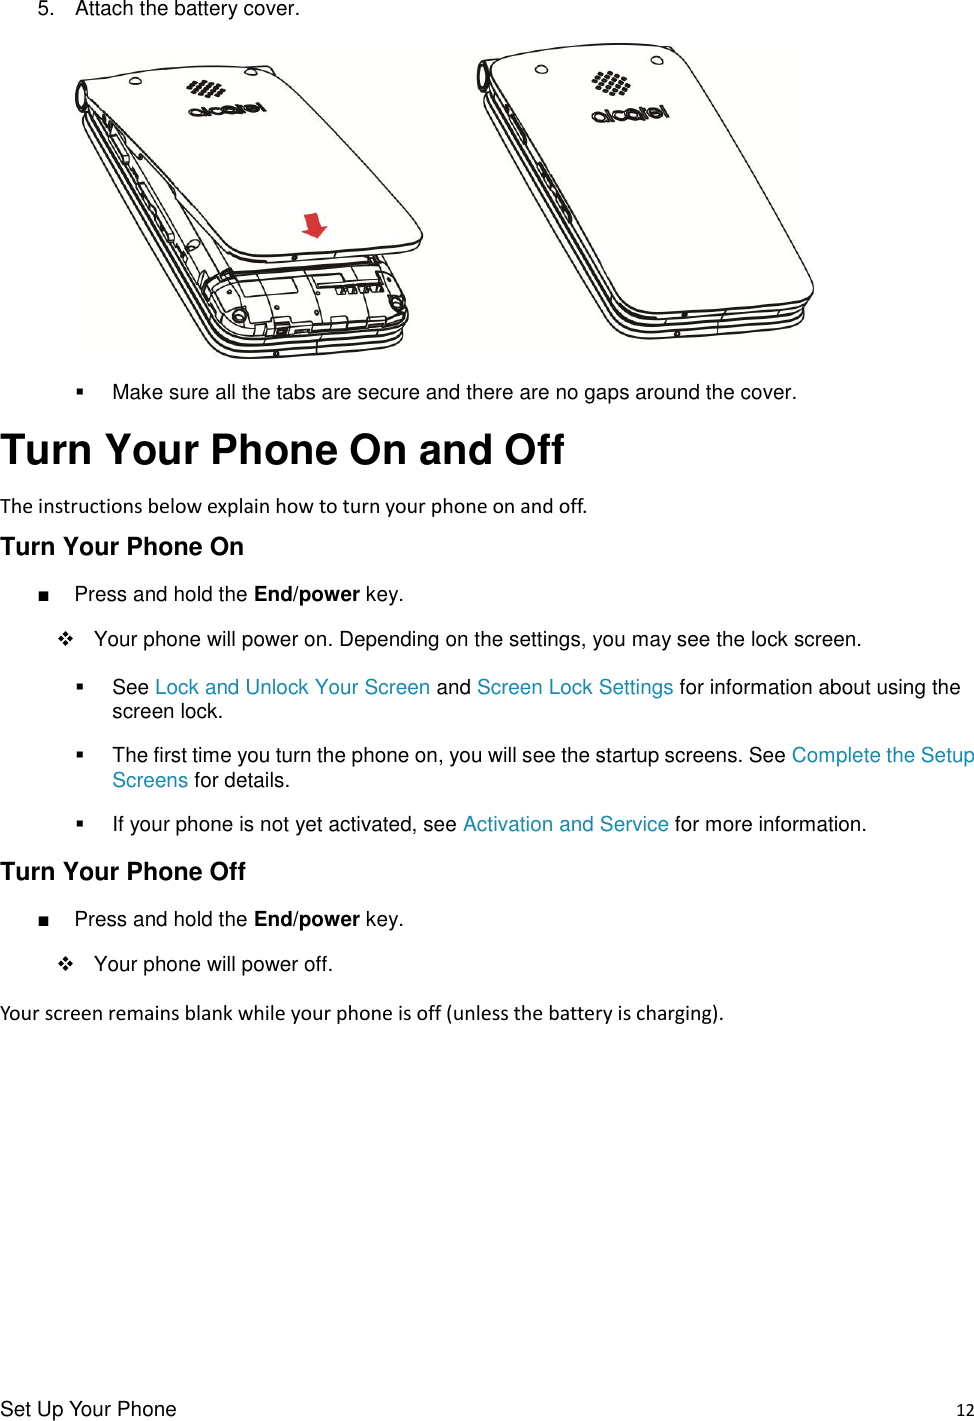 Set Up Your Phone    12 5.  Attach the battery cover.     Make sure all the tabs are secure and there are no gaps around the cover. Turn Your Phone On and Off The instructions below explain how to turn your phone on and off. Turn Your Phone On ■  Press and hold the End/power key.      Your phone will power on. Depending on the settings, you may see the lock screen.   See Lock and Unlock Your Screen and Screen Lock Settings for information about using the screen lock.   The first time you turn the phone on, you will see the startup screens. See Complete the Setup Screens for details.   If your phone is not yet activated, see Activation and Service for more information. Turn Your Phone Off ■  Press and hold the End/power key.         Your phone will power off. Your screen remains blank while your phone is off (unless the battery is charging).         